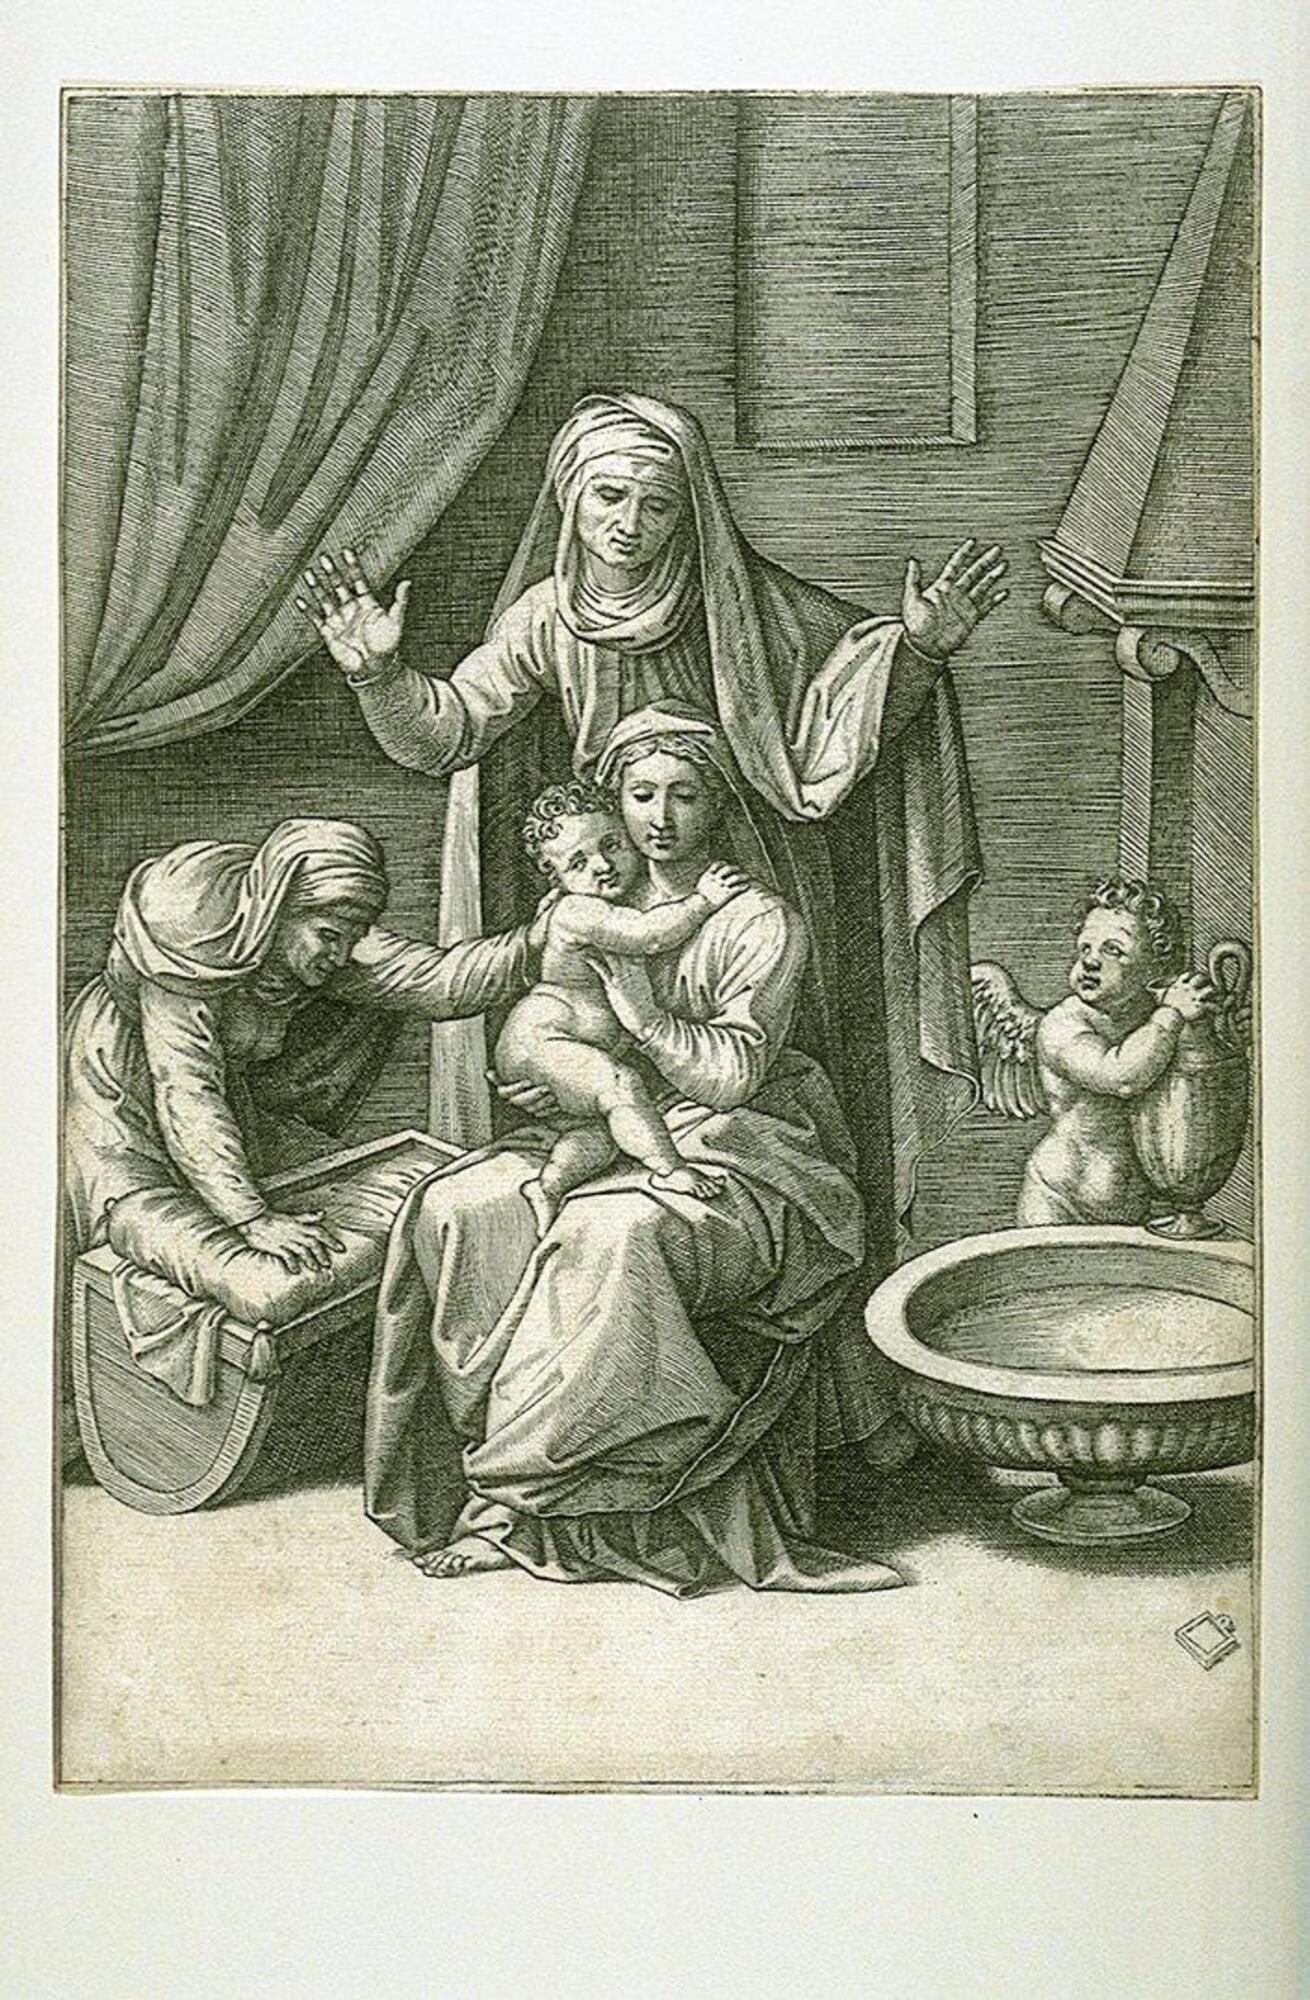 This sober, pyramidal composition consists of five figures within an interior. A seated woman and child occupy the center of the composition while flanking her to the left is a kneeling older woman with her left hand on the child her right hand on the cradle. To the right of the seated woman is a putti holding a ewer and standing next to a basin. Standing behind the seated woman is a standing woman with hands raised. All of the women are dressed in generalized classical drapery.